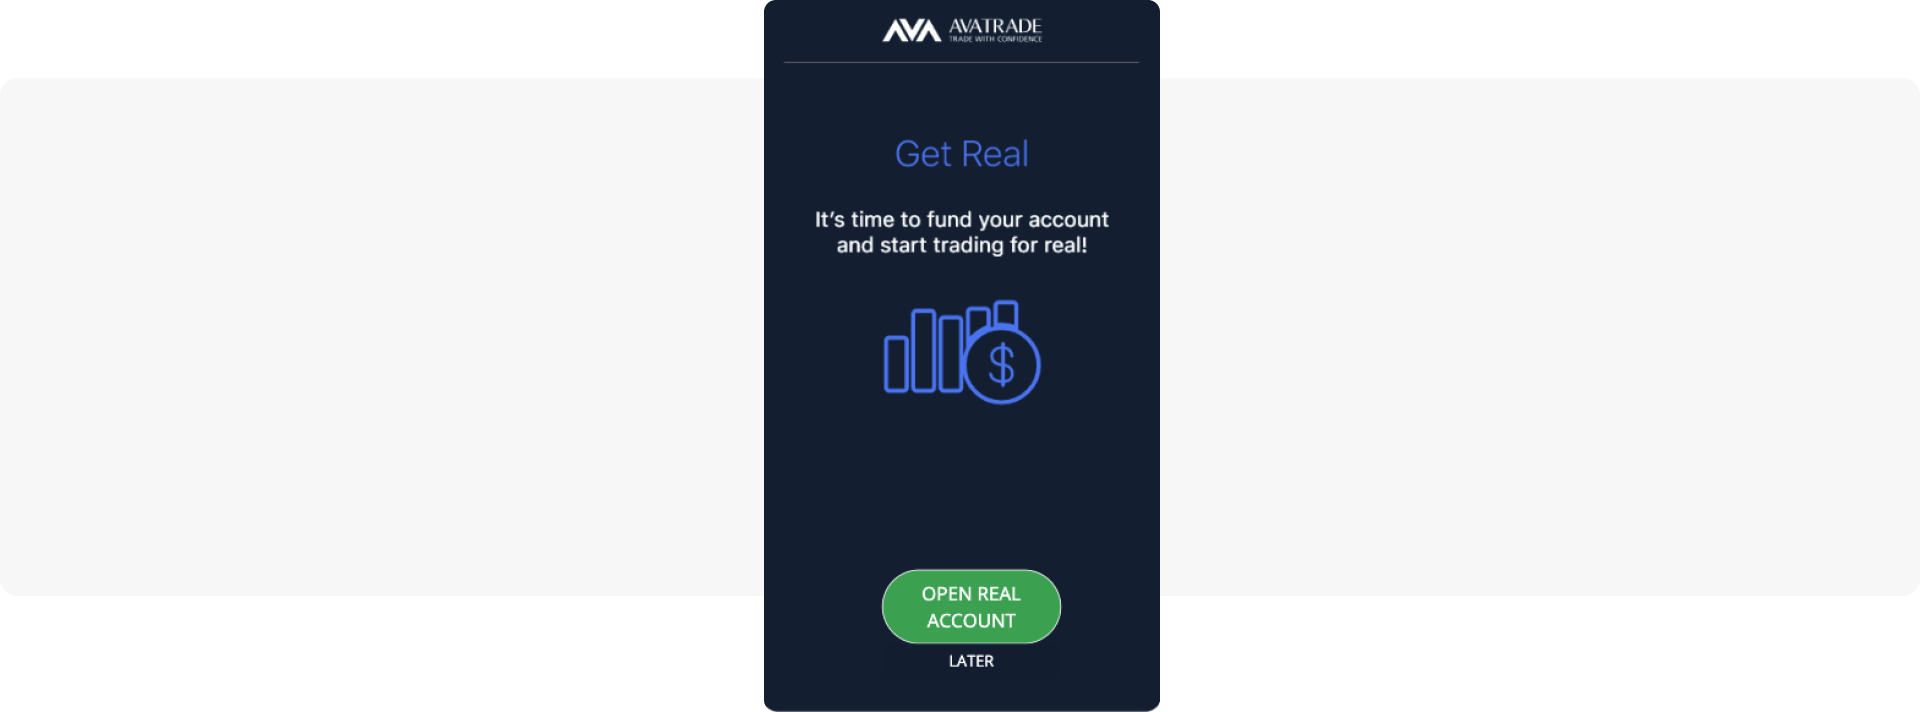 Register a real account - in-app message - AvaTrade